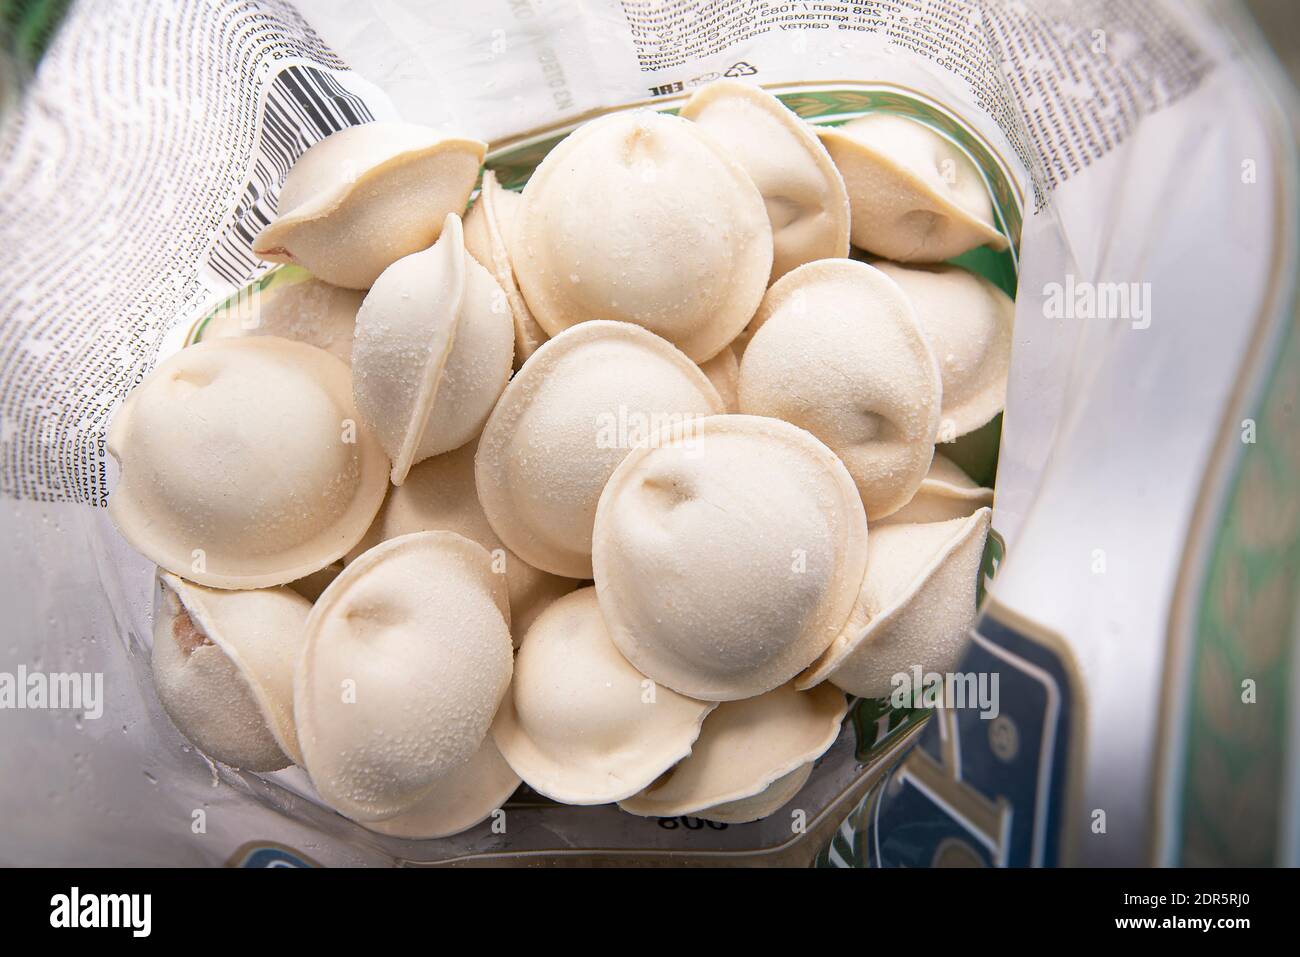 MOSCOW - DEC 20: Opened pack with frozen Russian dumplings or pel'meni on table in Moscow, December 20, 2020 in Russia Stock Photo